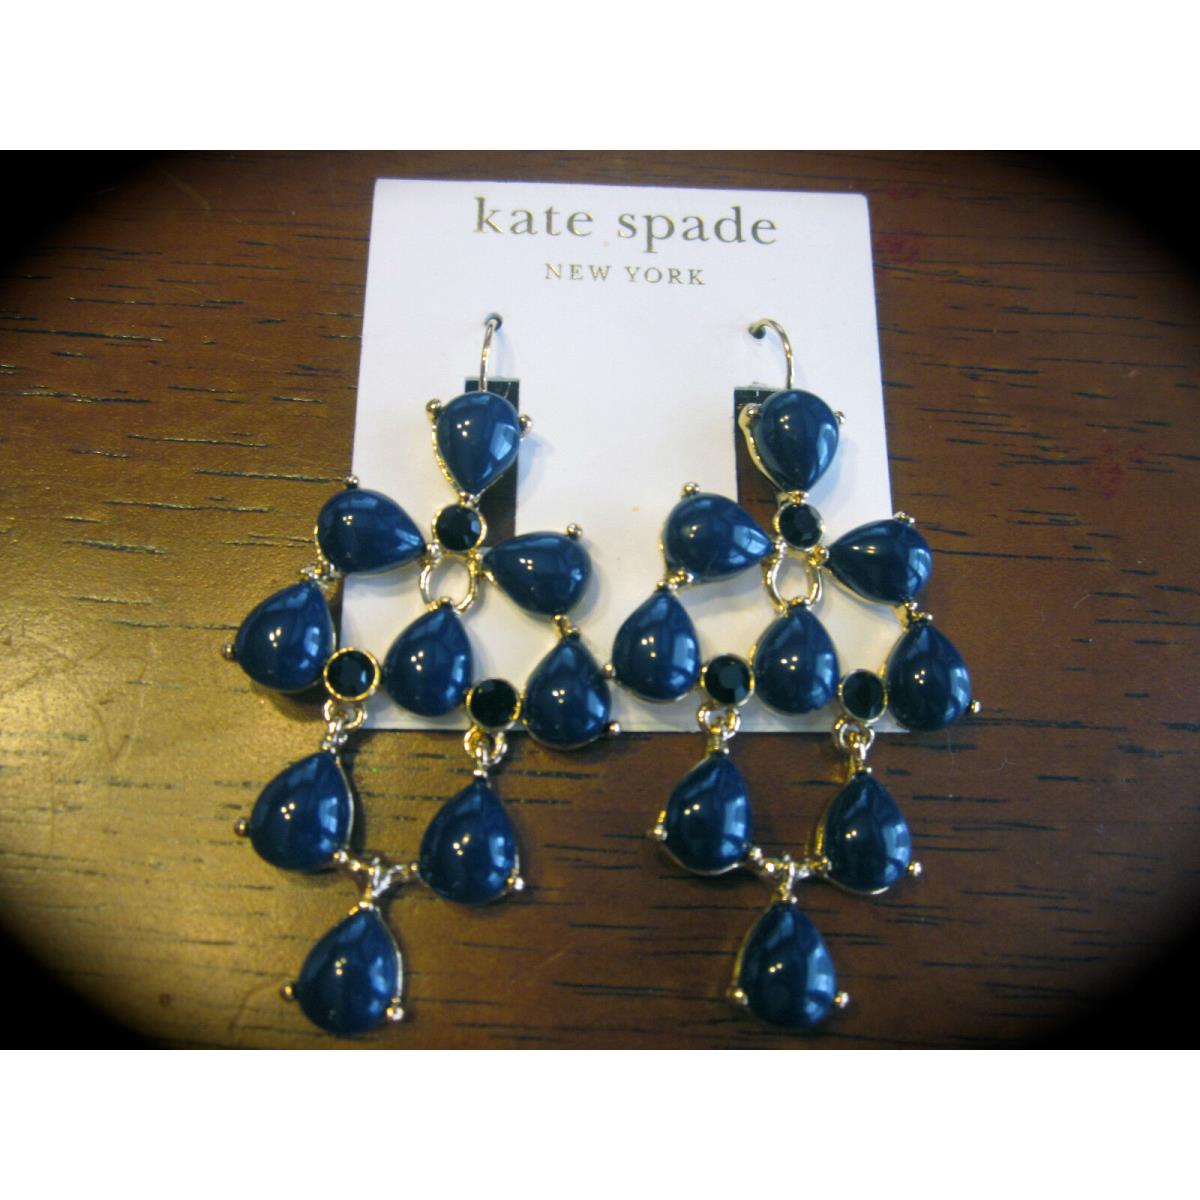 Kate Spade NY Exquisite Navy Blue Chandelier Drop Earrings Glossy Garden